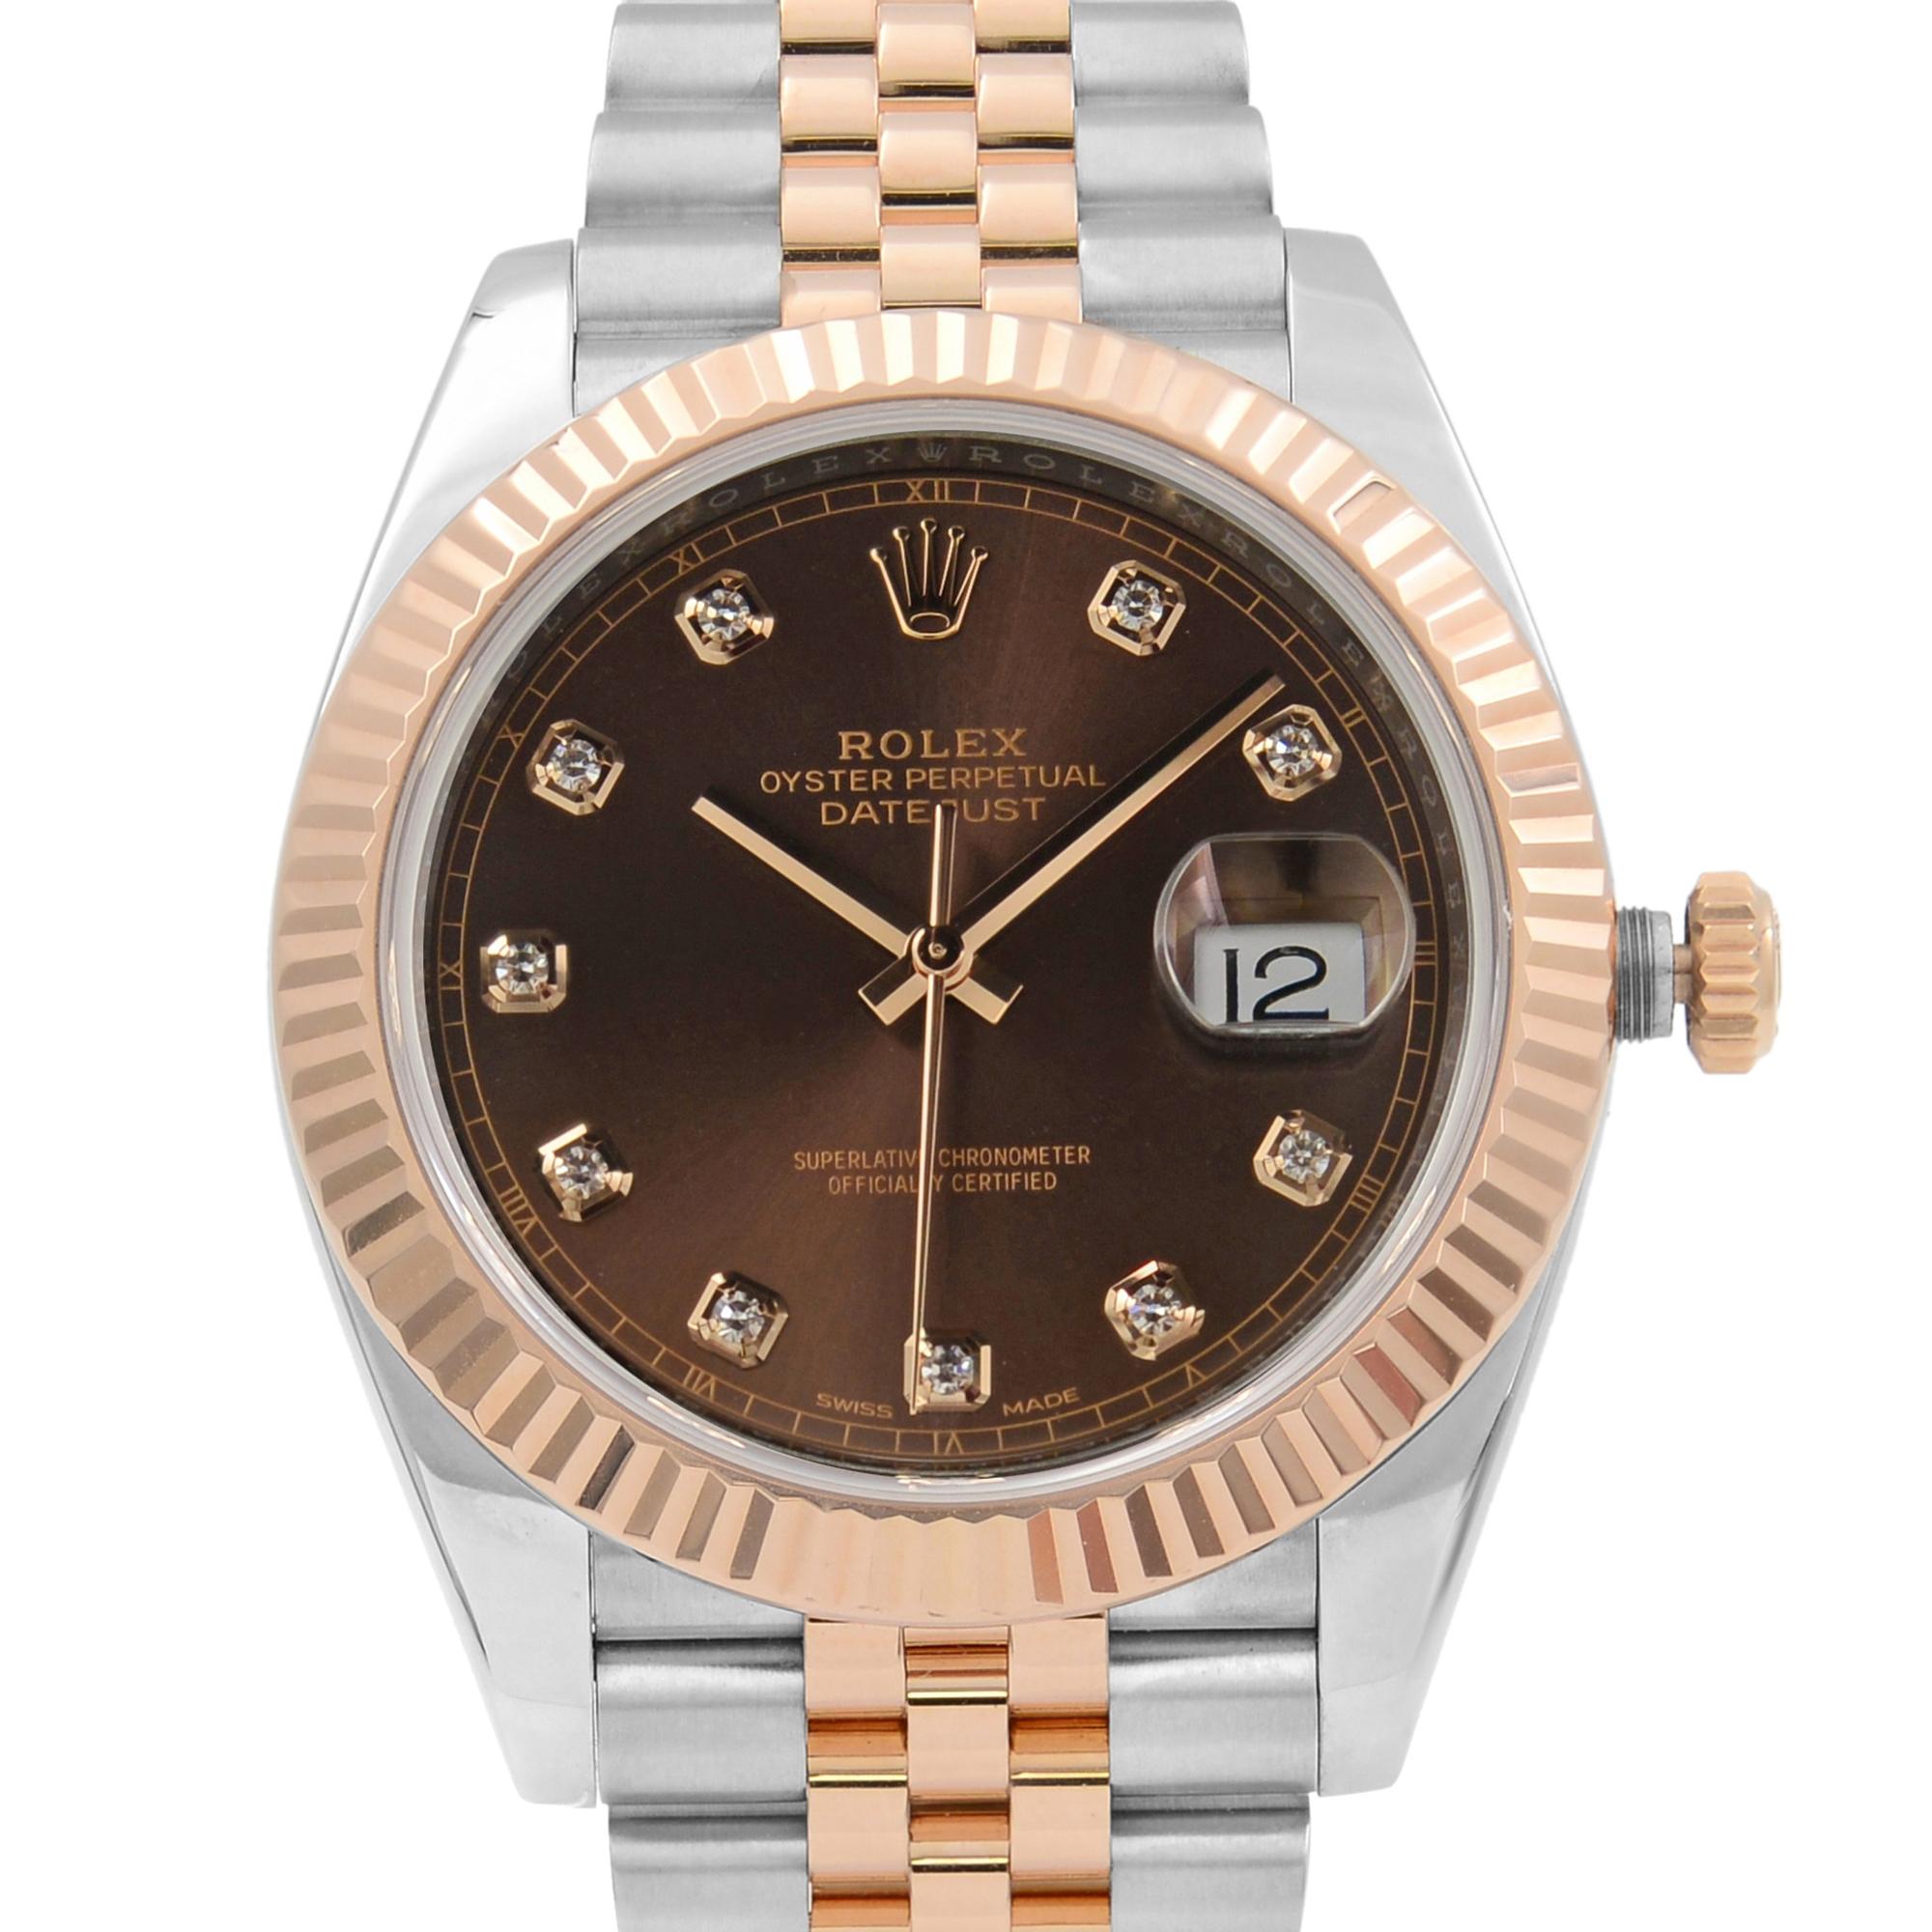 This pre-owned Rolex Datejust 41 126331 is a beautiful men's timepiece that is powered by mechanical (automatic) movement which is cased in a stainless steel case. It has a round shape face, date indicator, diamonds dial and has hand diamonds style